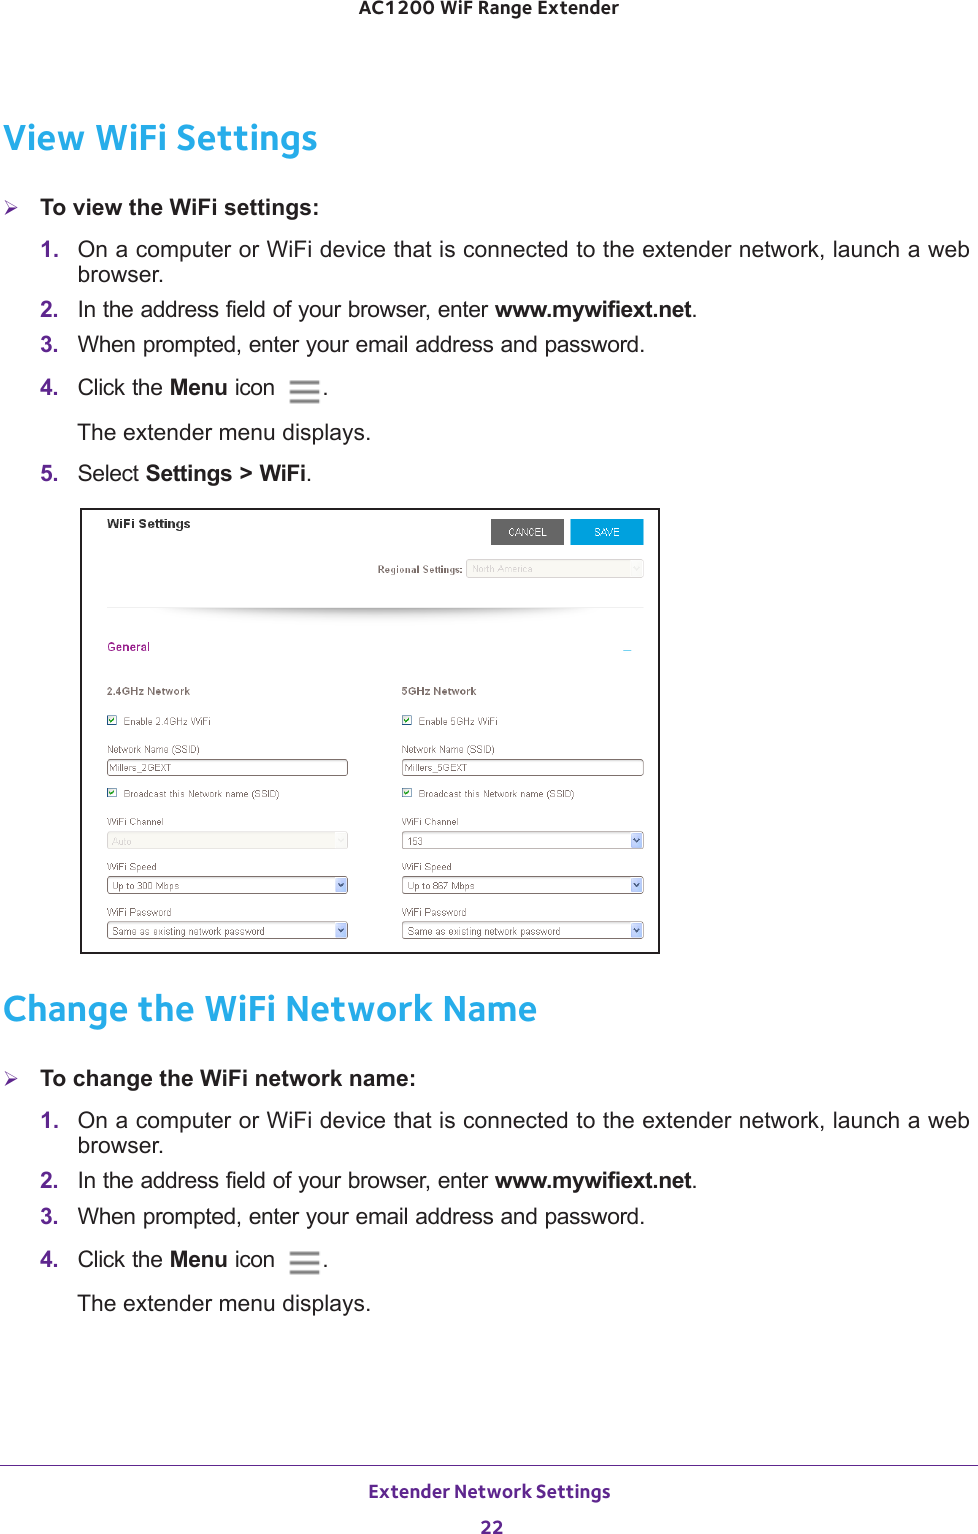 Extender Network Settings 22AC1200 WiF Range Extender View WiFi SettingsTo view the WiFi settings:1.  On a computer or WiFi device that is connected to the extender network, launch a web browser. 2.  In the address field of your browser, enter www.mywifiext.net. 3.  When prompted, enter your email address and password.4.  Click the Menu icon  .The extender menu displays.5.  Select Settings &gt; WiFi.Change the WiFi Network NameTo change the WiFi network name:1.  On a computer or WiFi device that is connected to the extender network, launch a web browser. 2.  In the address field of your browser, enter www.mywifiext.net. 3.  When prompted, enter your email address and password.4.  Click the Menu icon  .The extender menu displays.